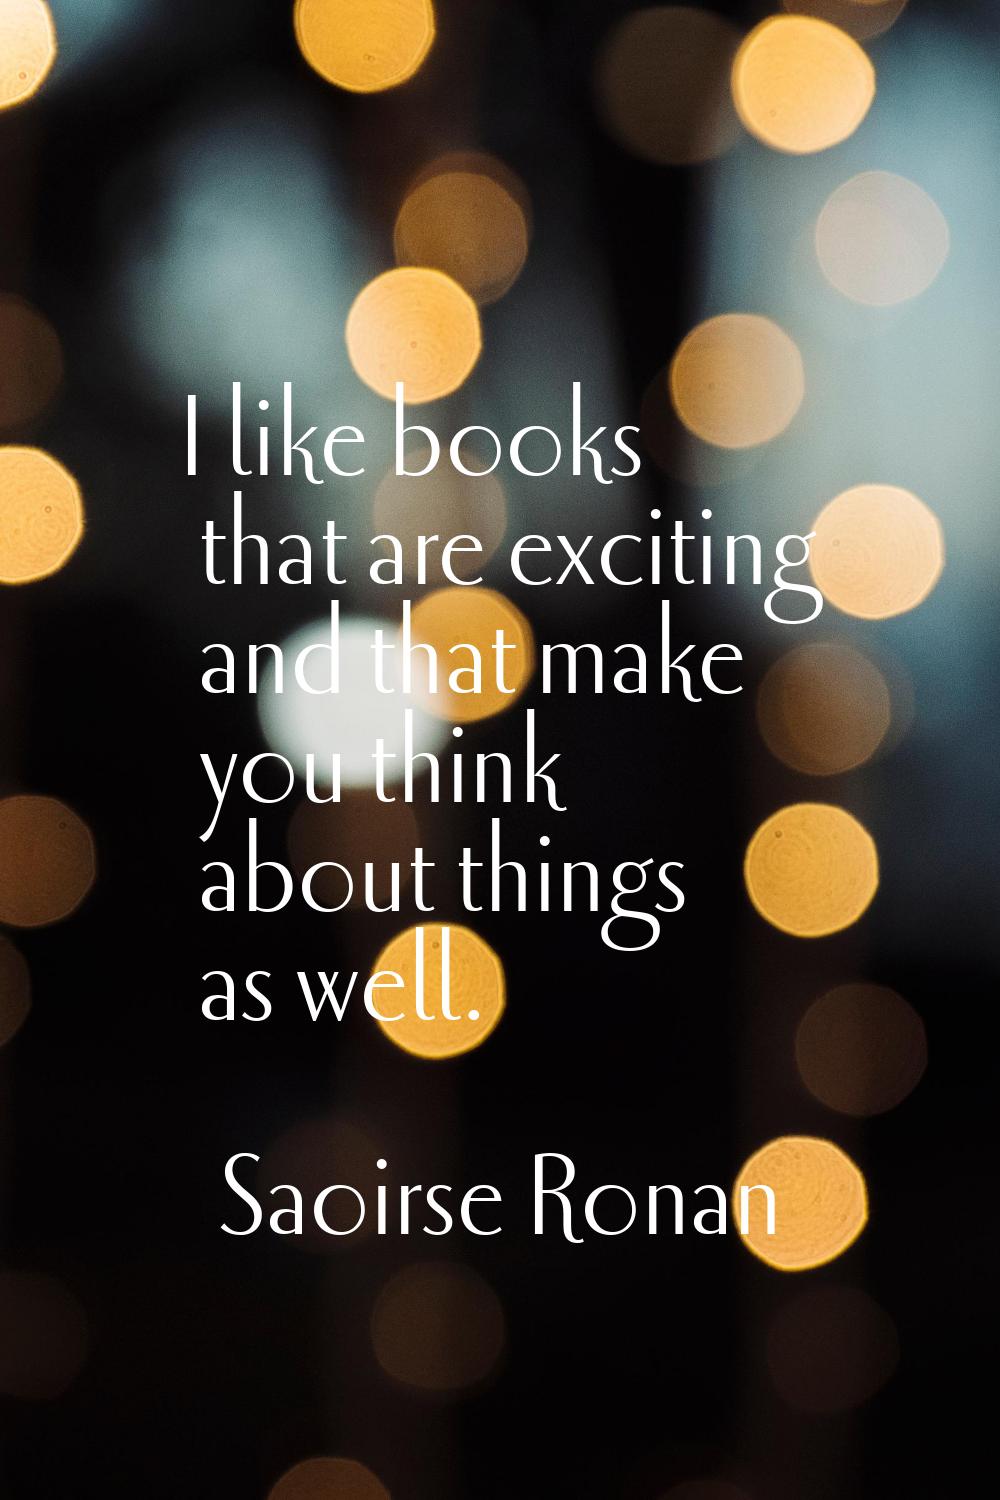 I like books that are exciting and that make you think about things as well.